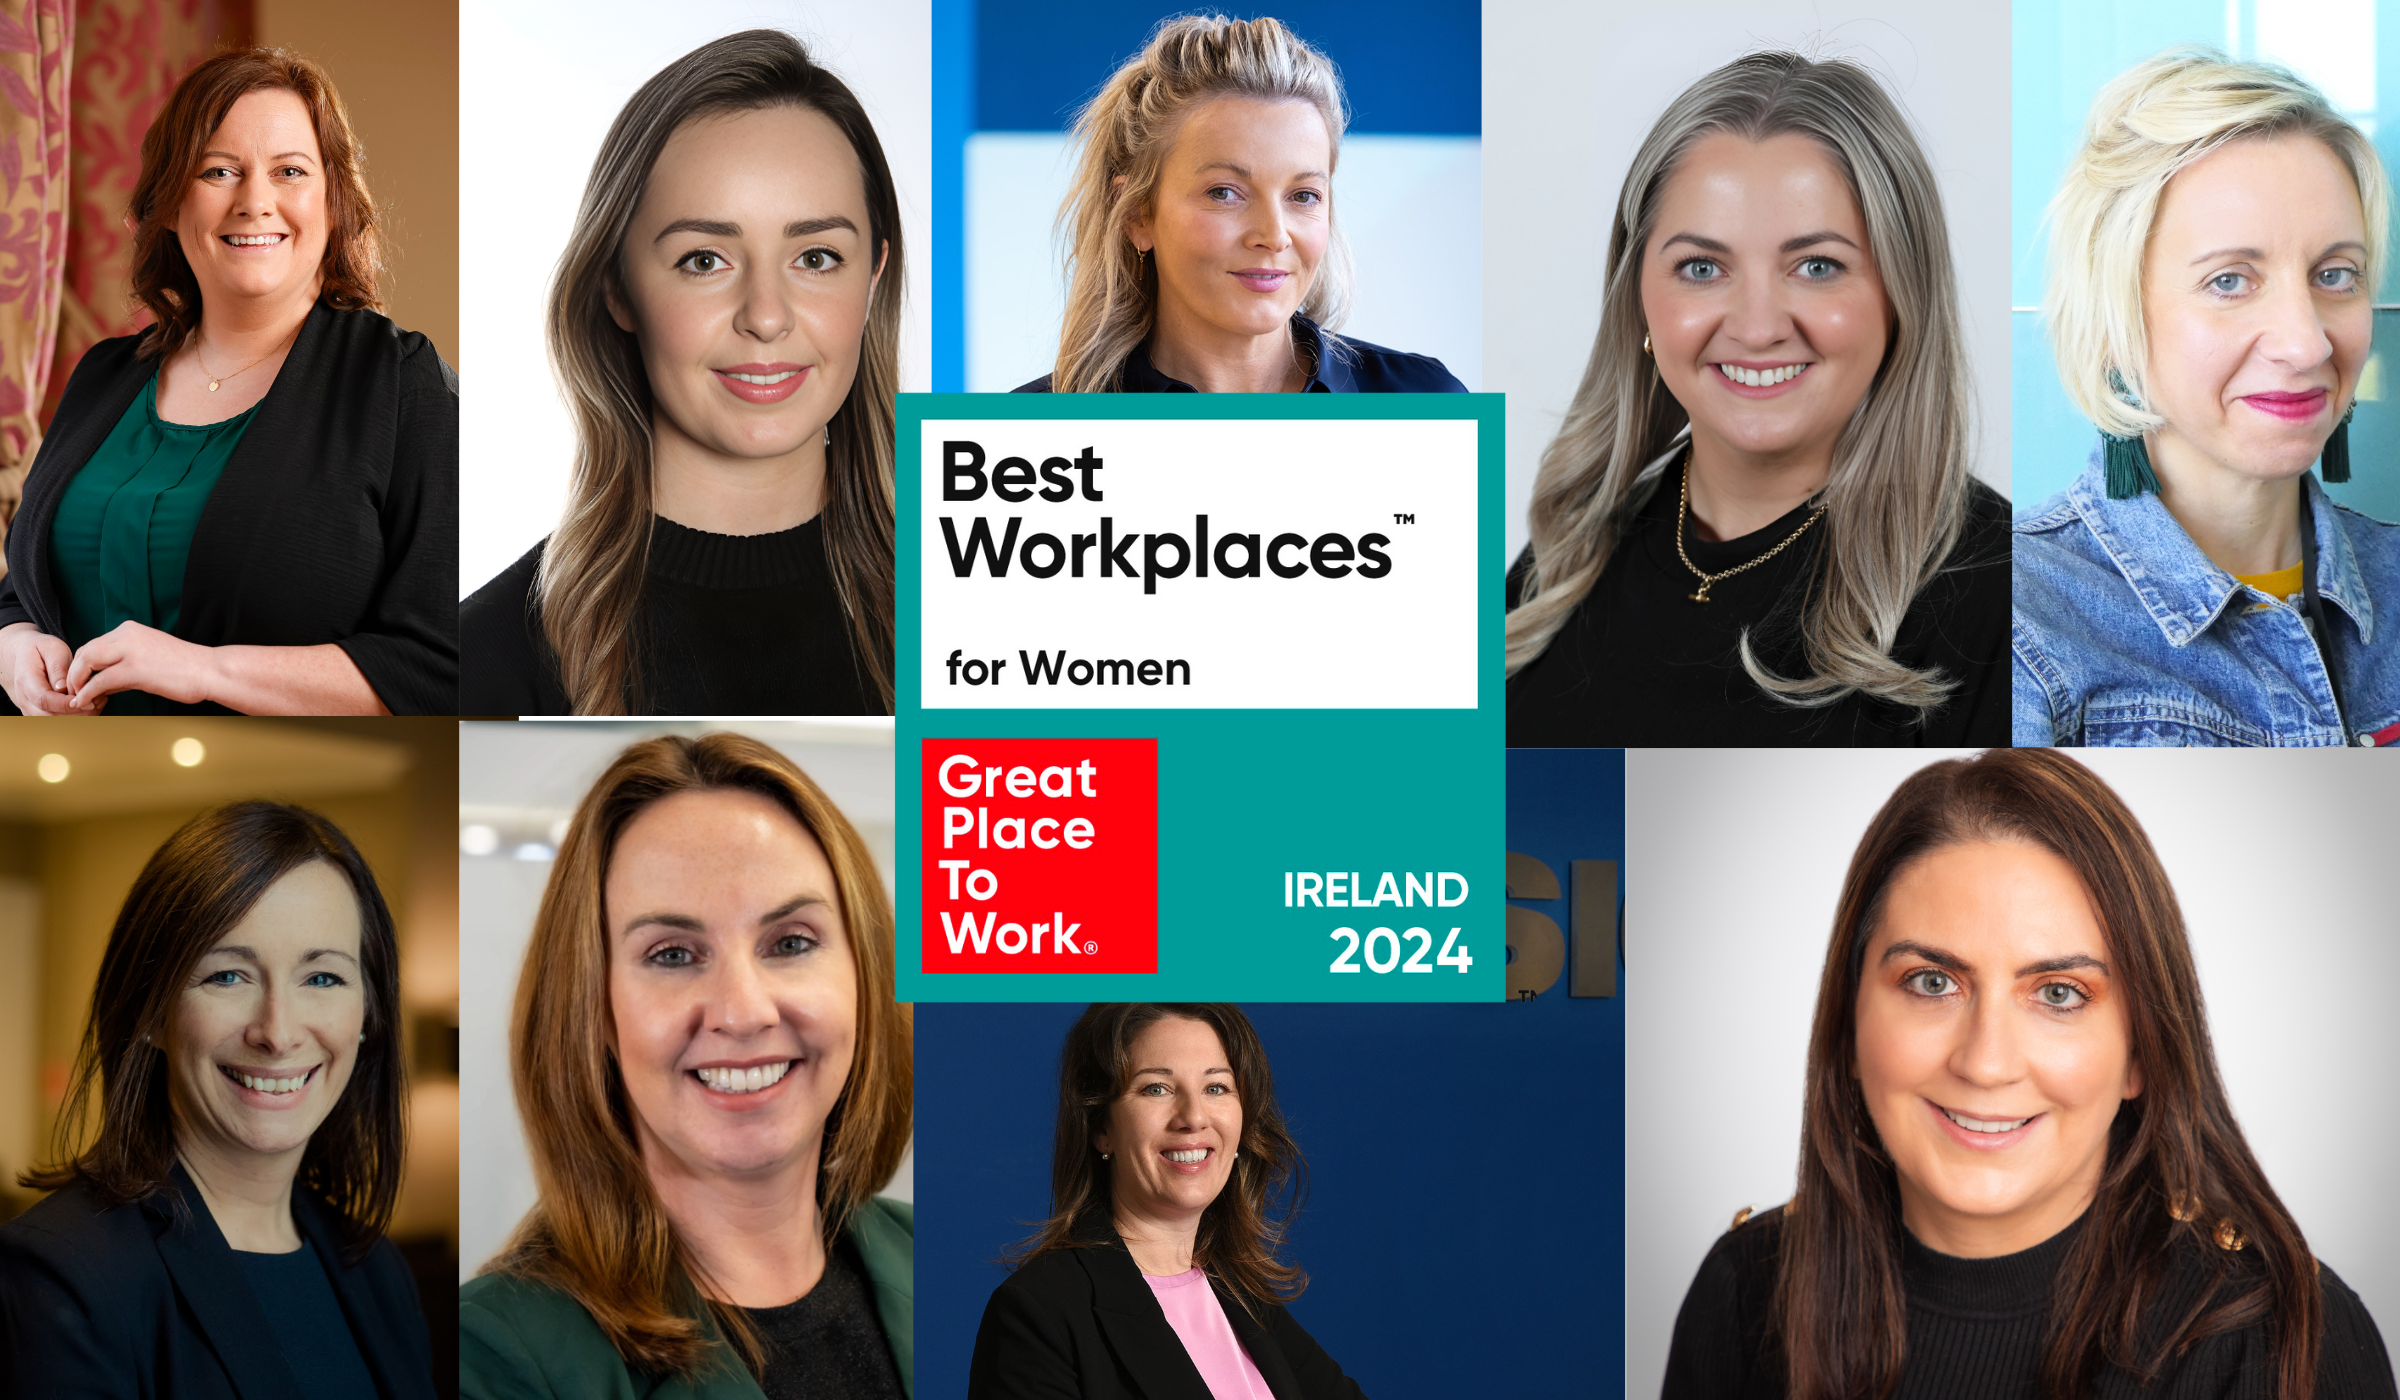 Revealed: The Best Workplaces for Women™ 2024!